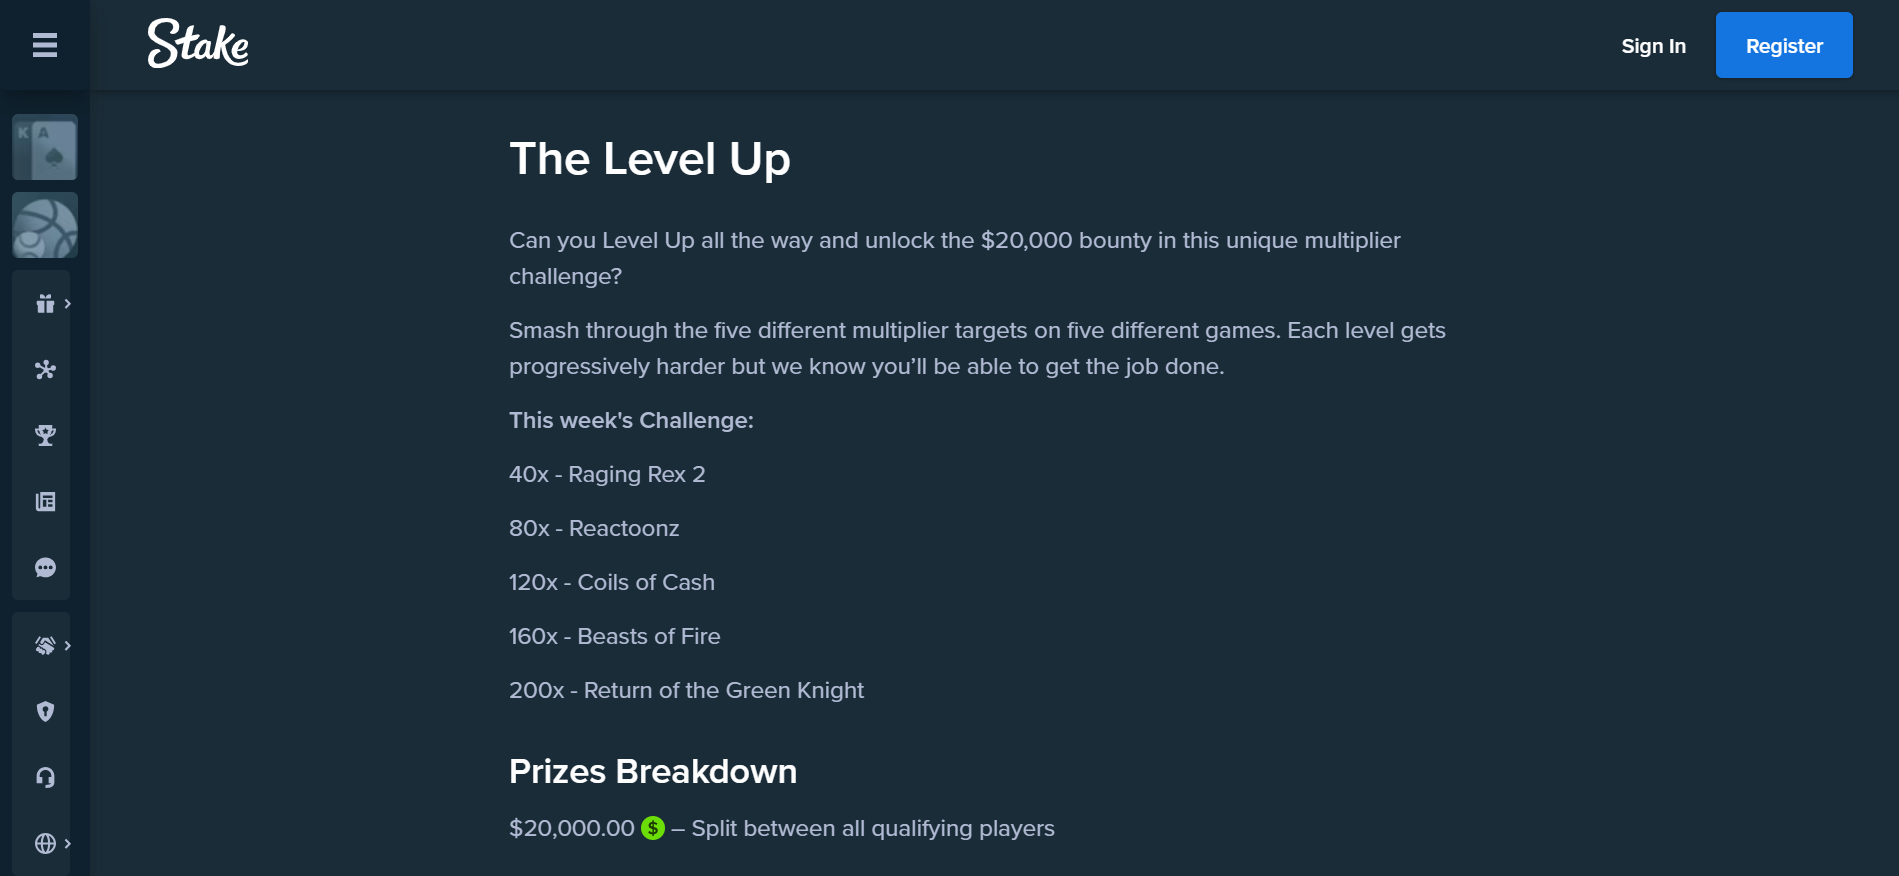 level up stake